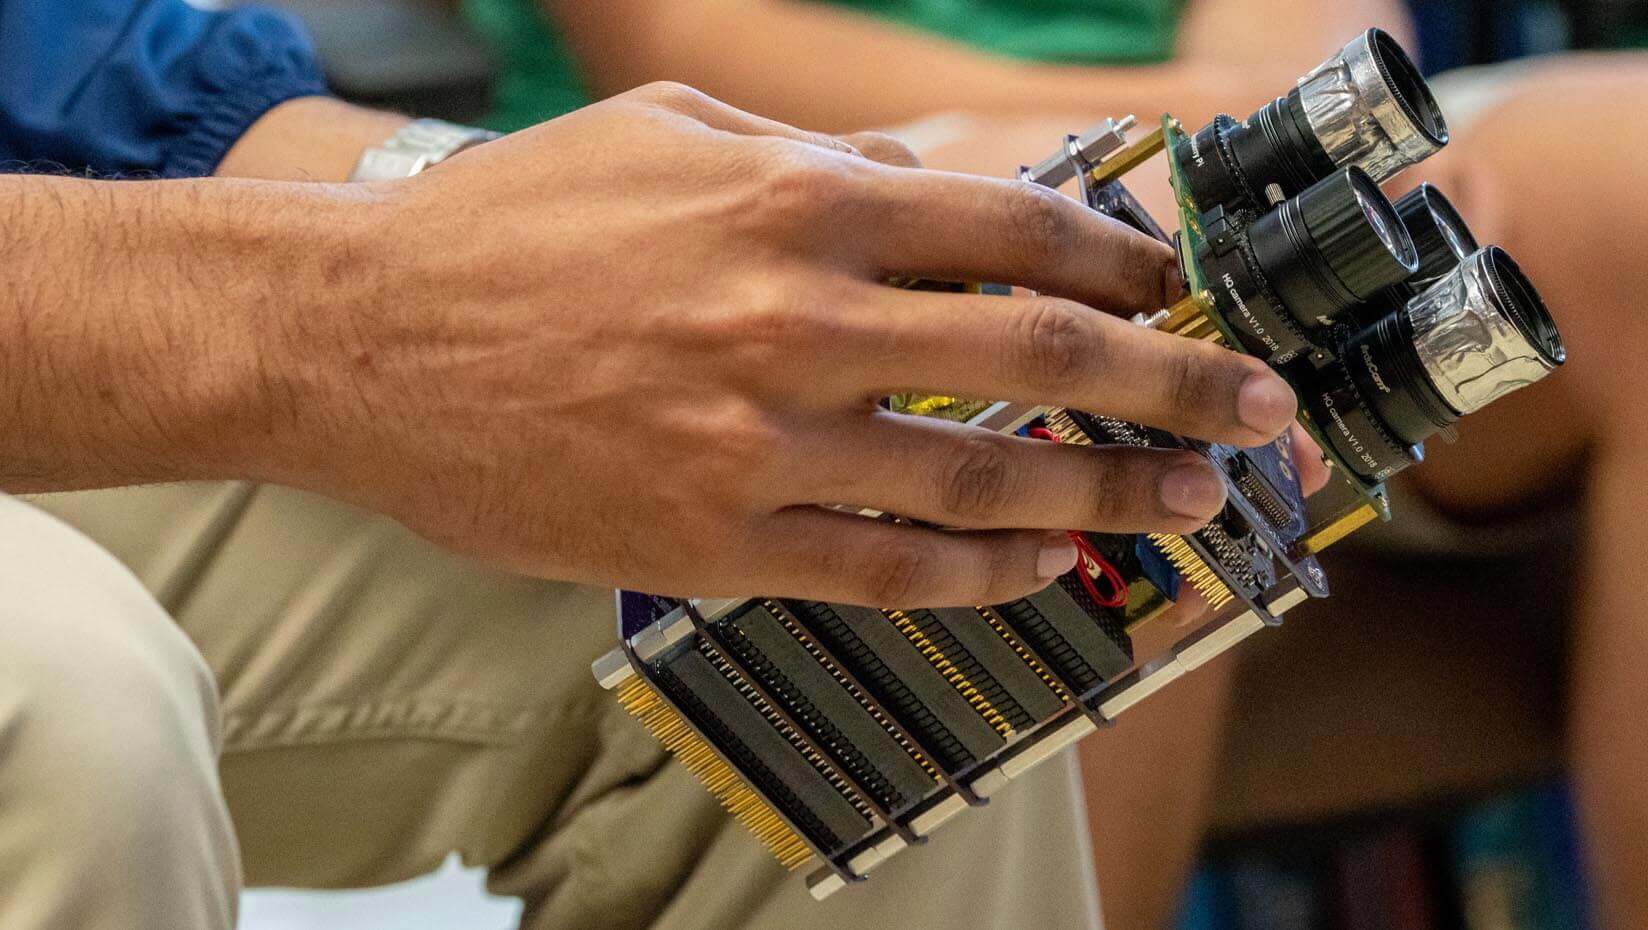 A photo of hands holding the satellite module